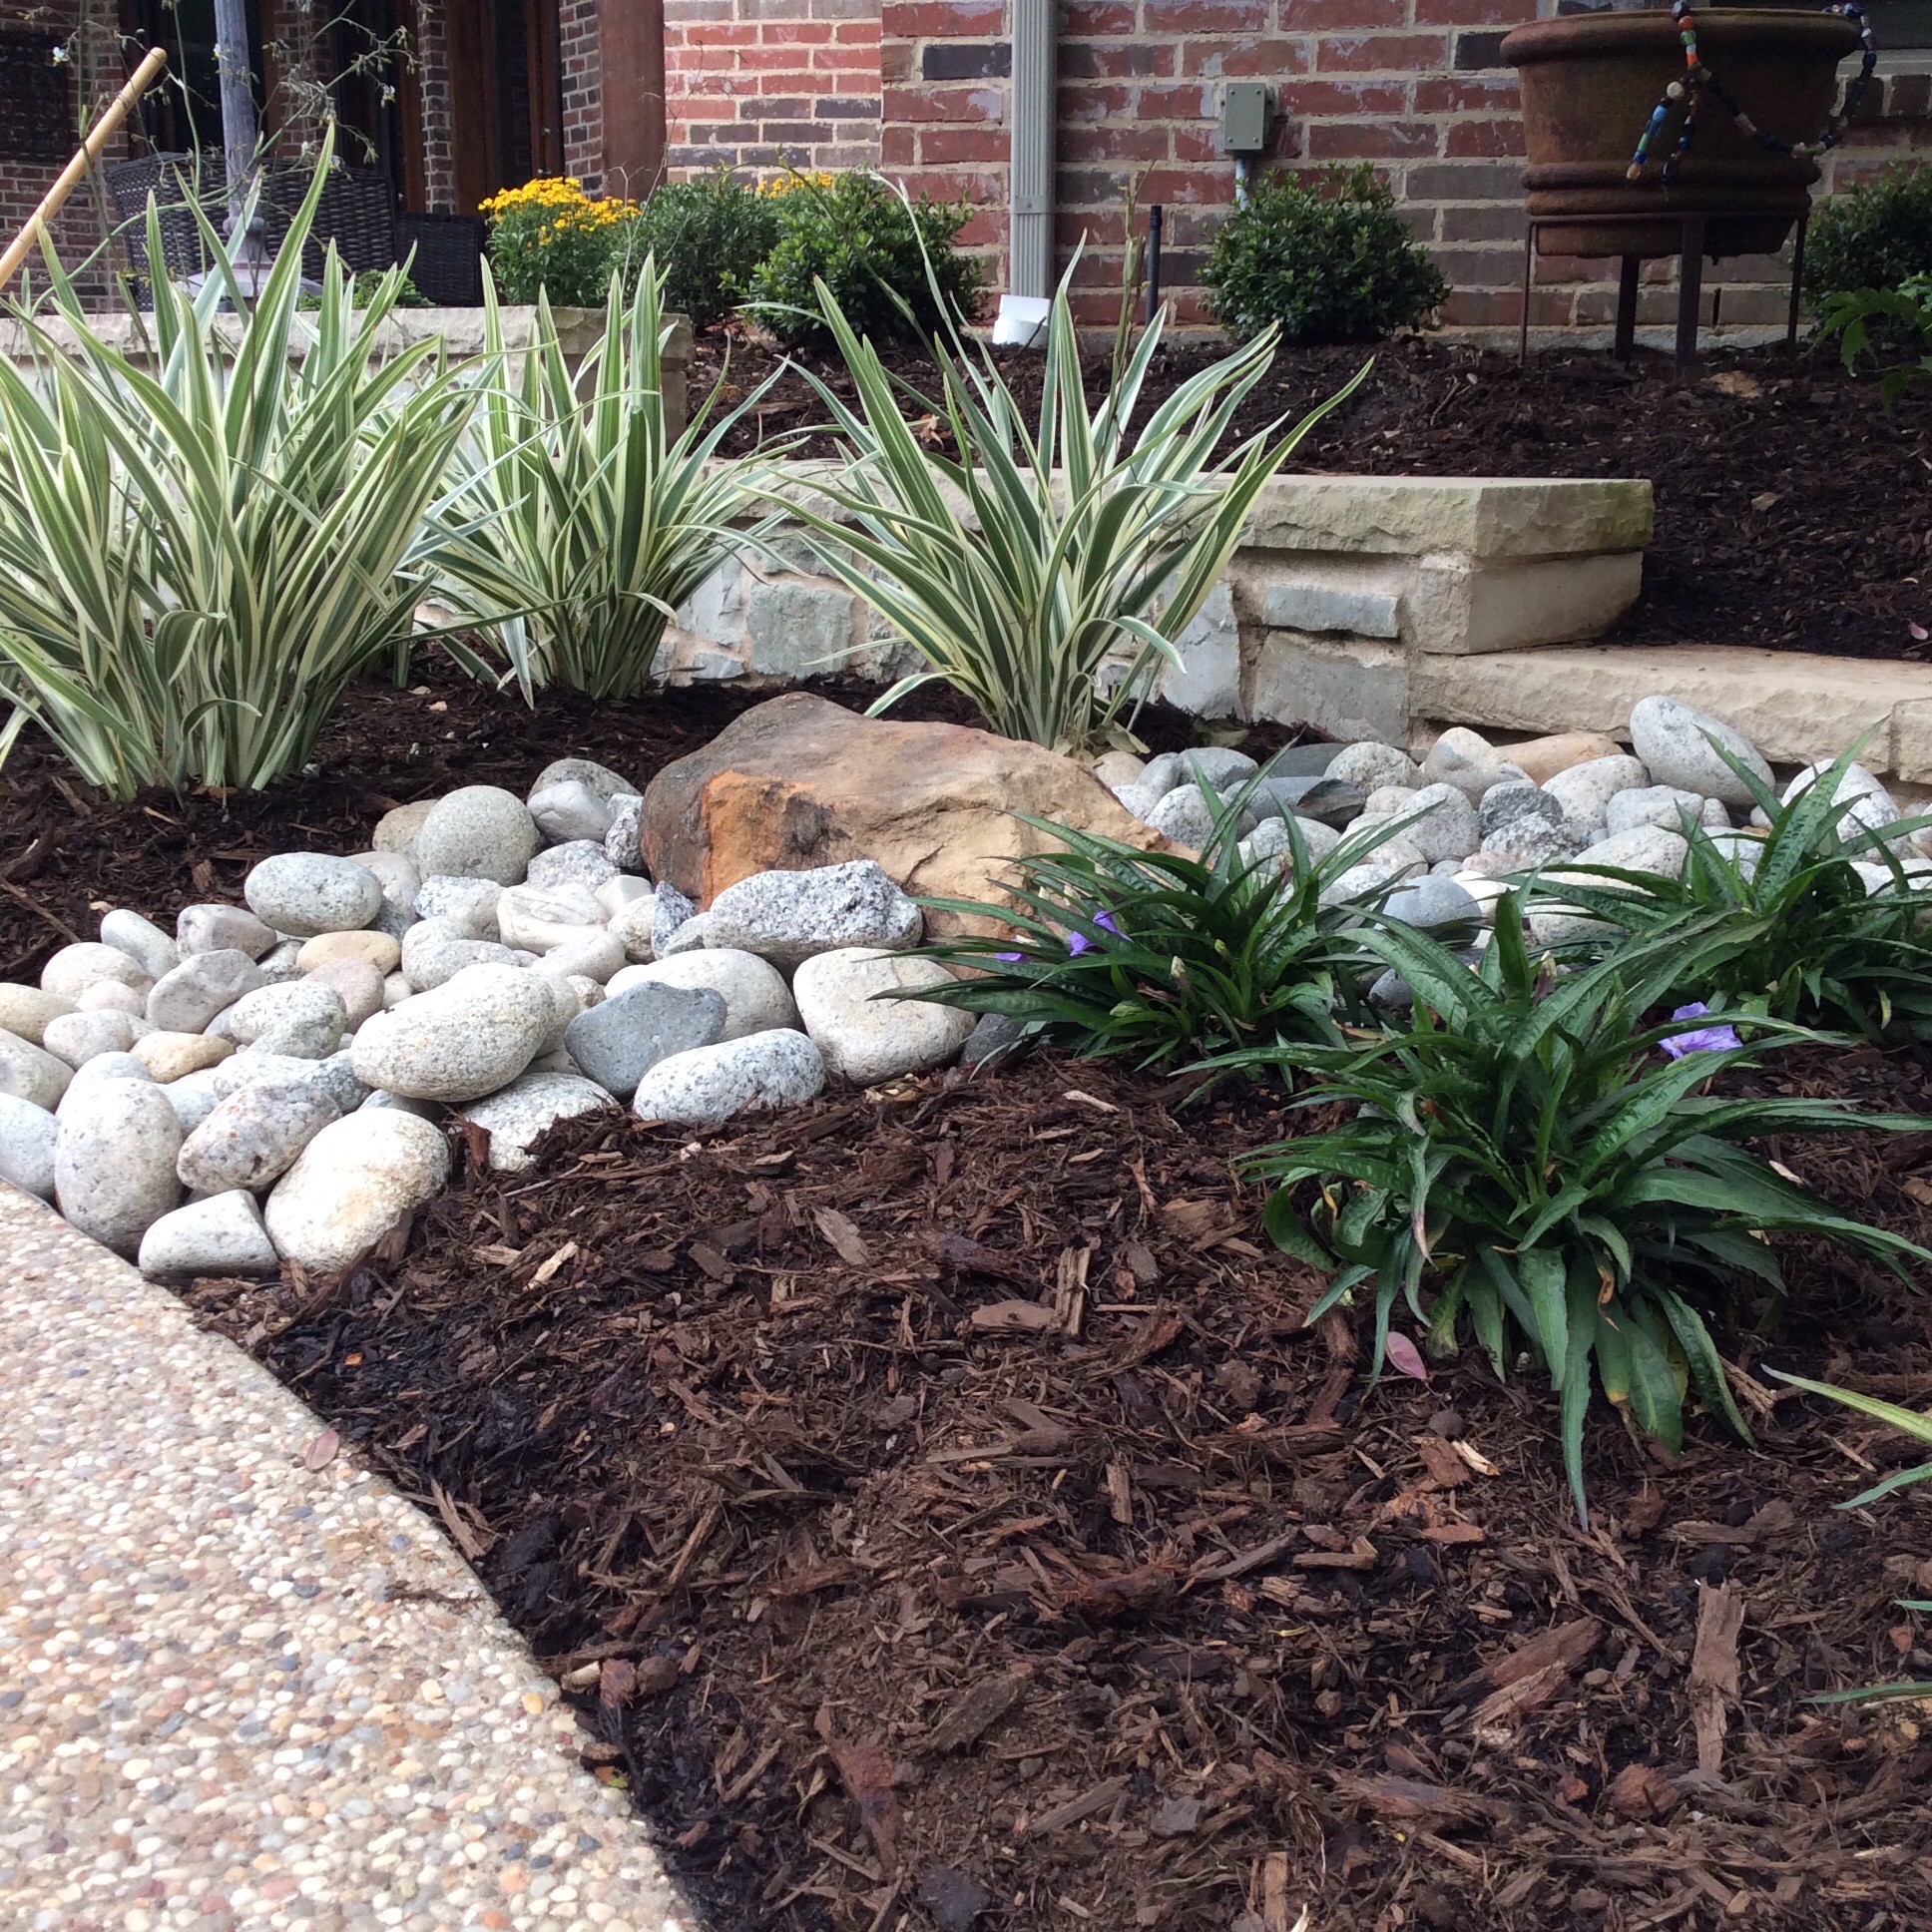 Install Landscape Fabric Under Rocks, How To Lay Rocks For Garden Border